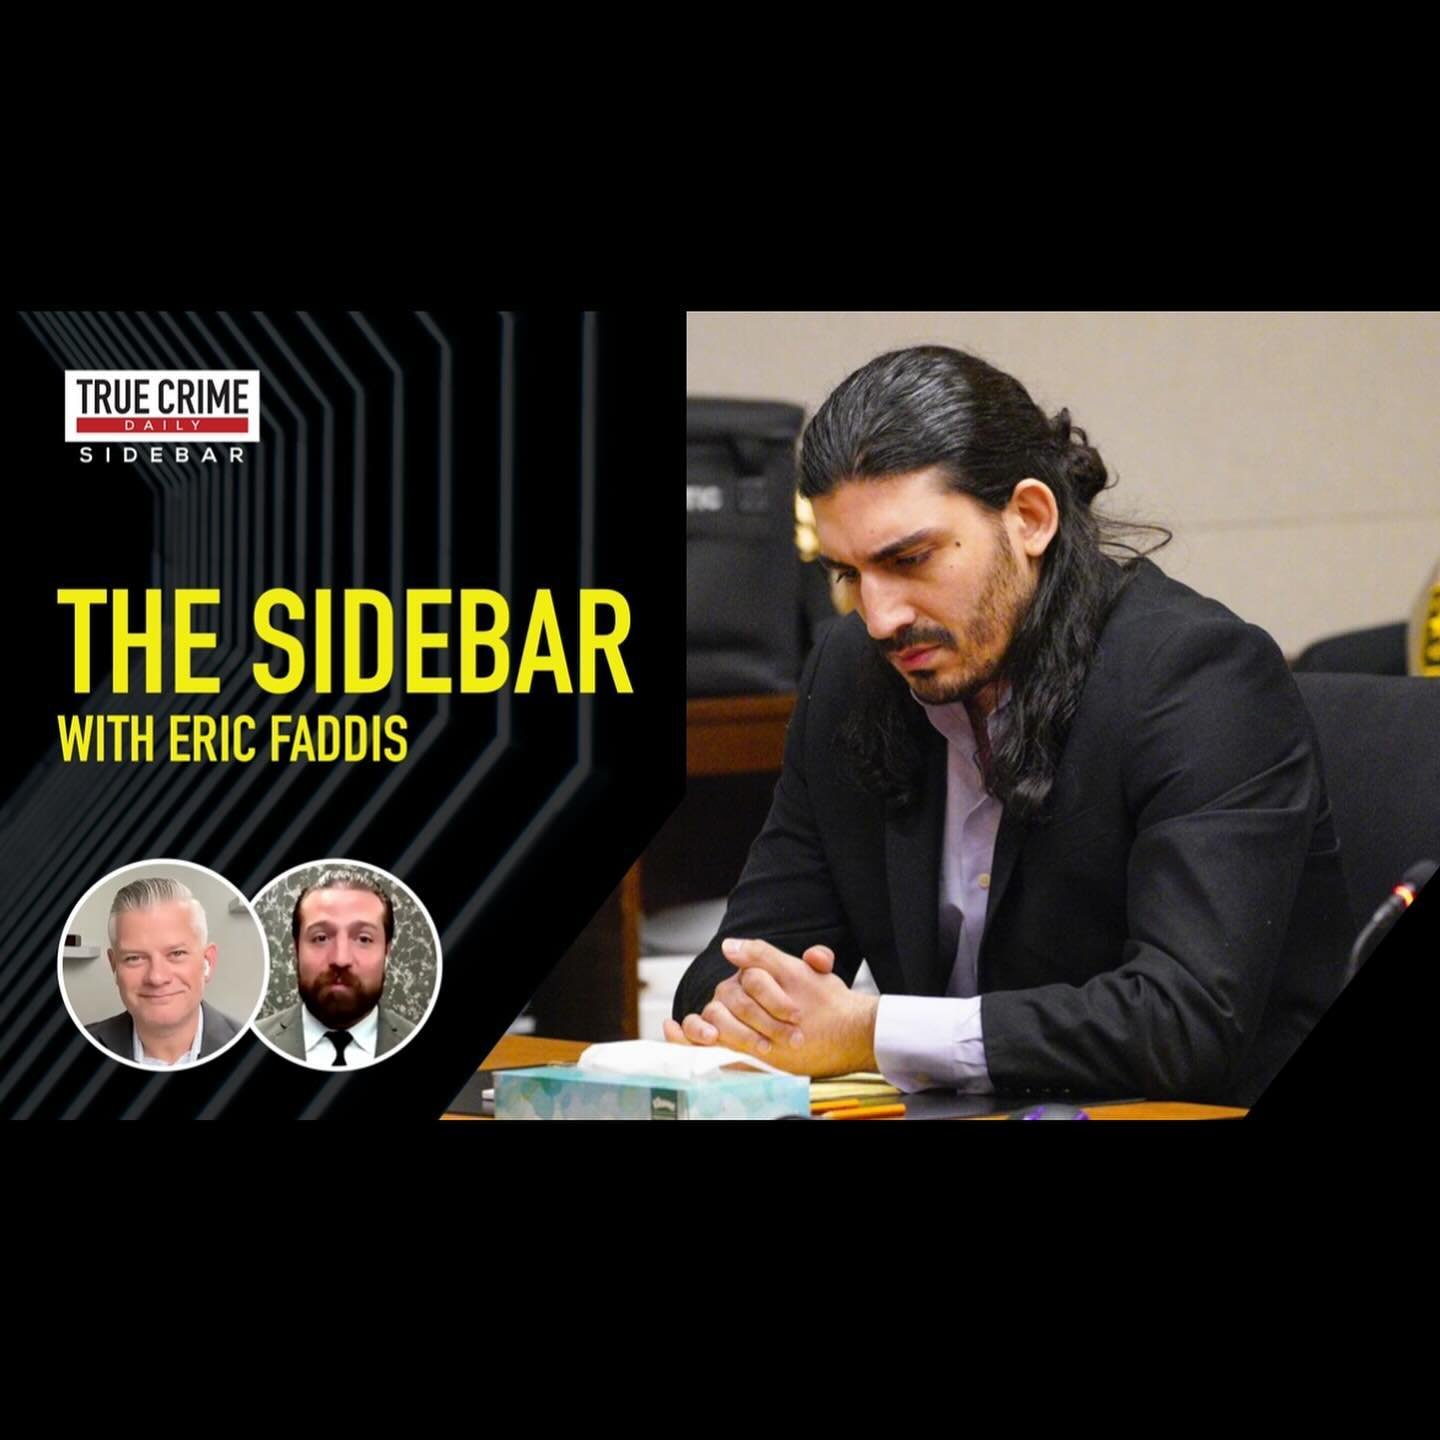 In this week&rsquo;s @crimewatchdaily #Sidebar, @e_fad joins me to discuss #JamesCraig, a dentist charged with fatally poisoning wife, facing ADDITIONAL charges, updates in the case of a California father accused of intentionally driving his family o